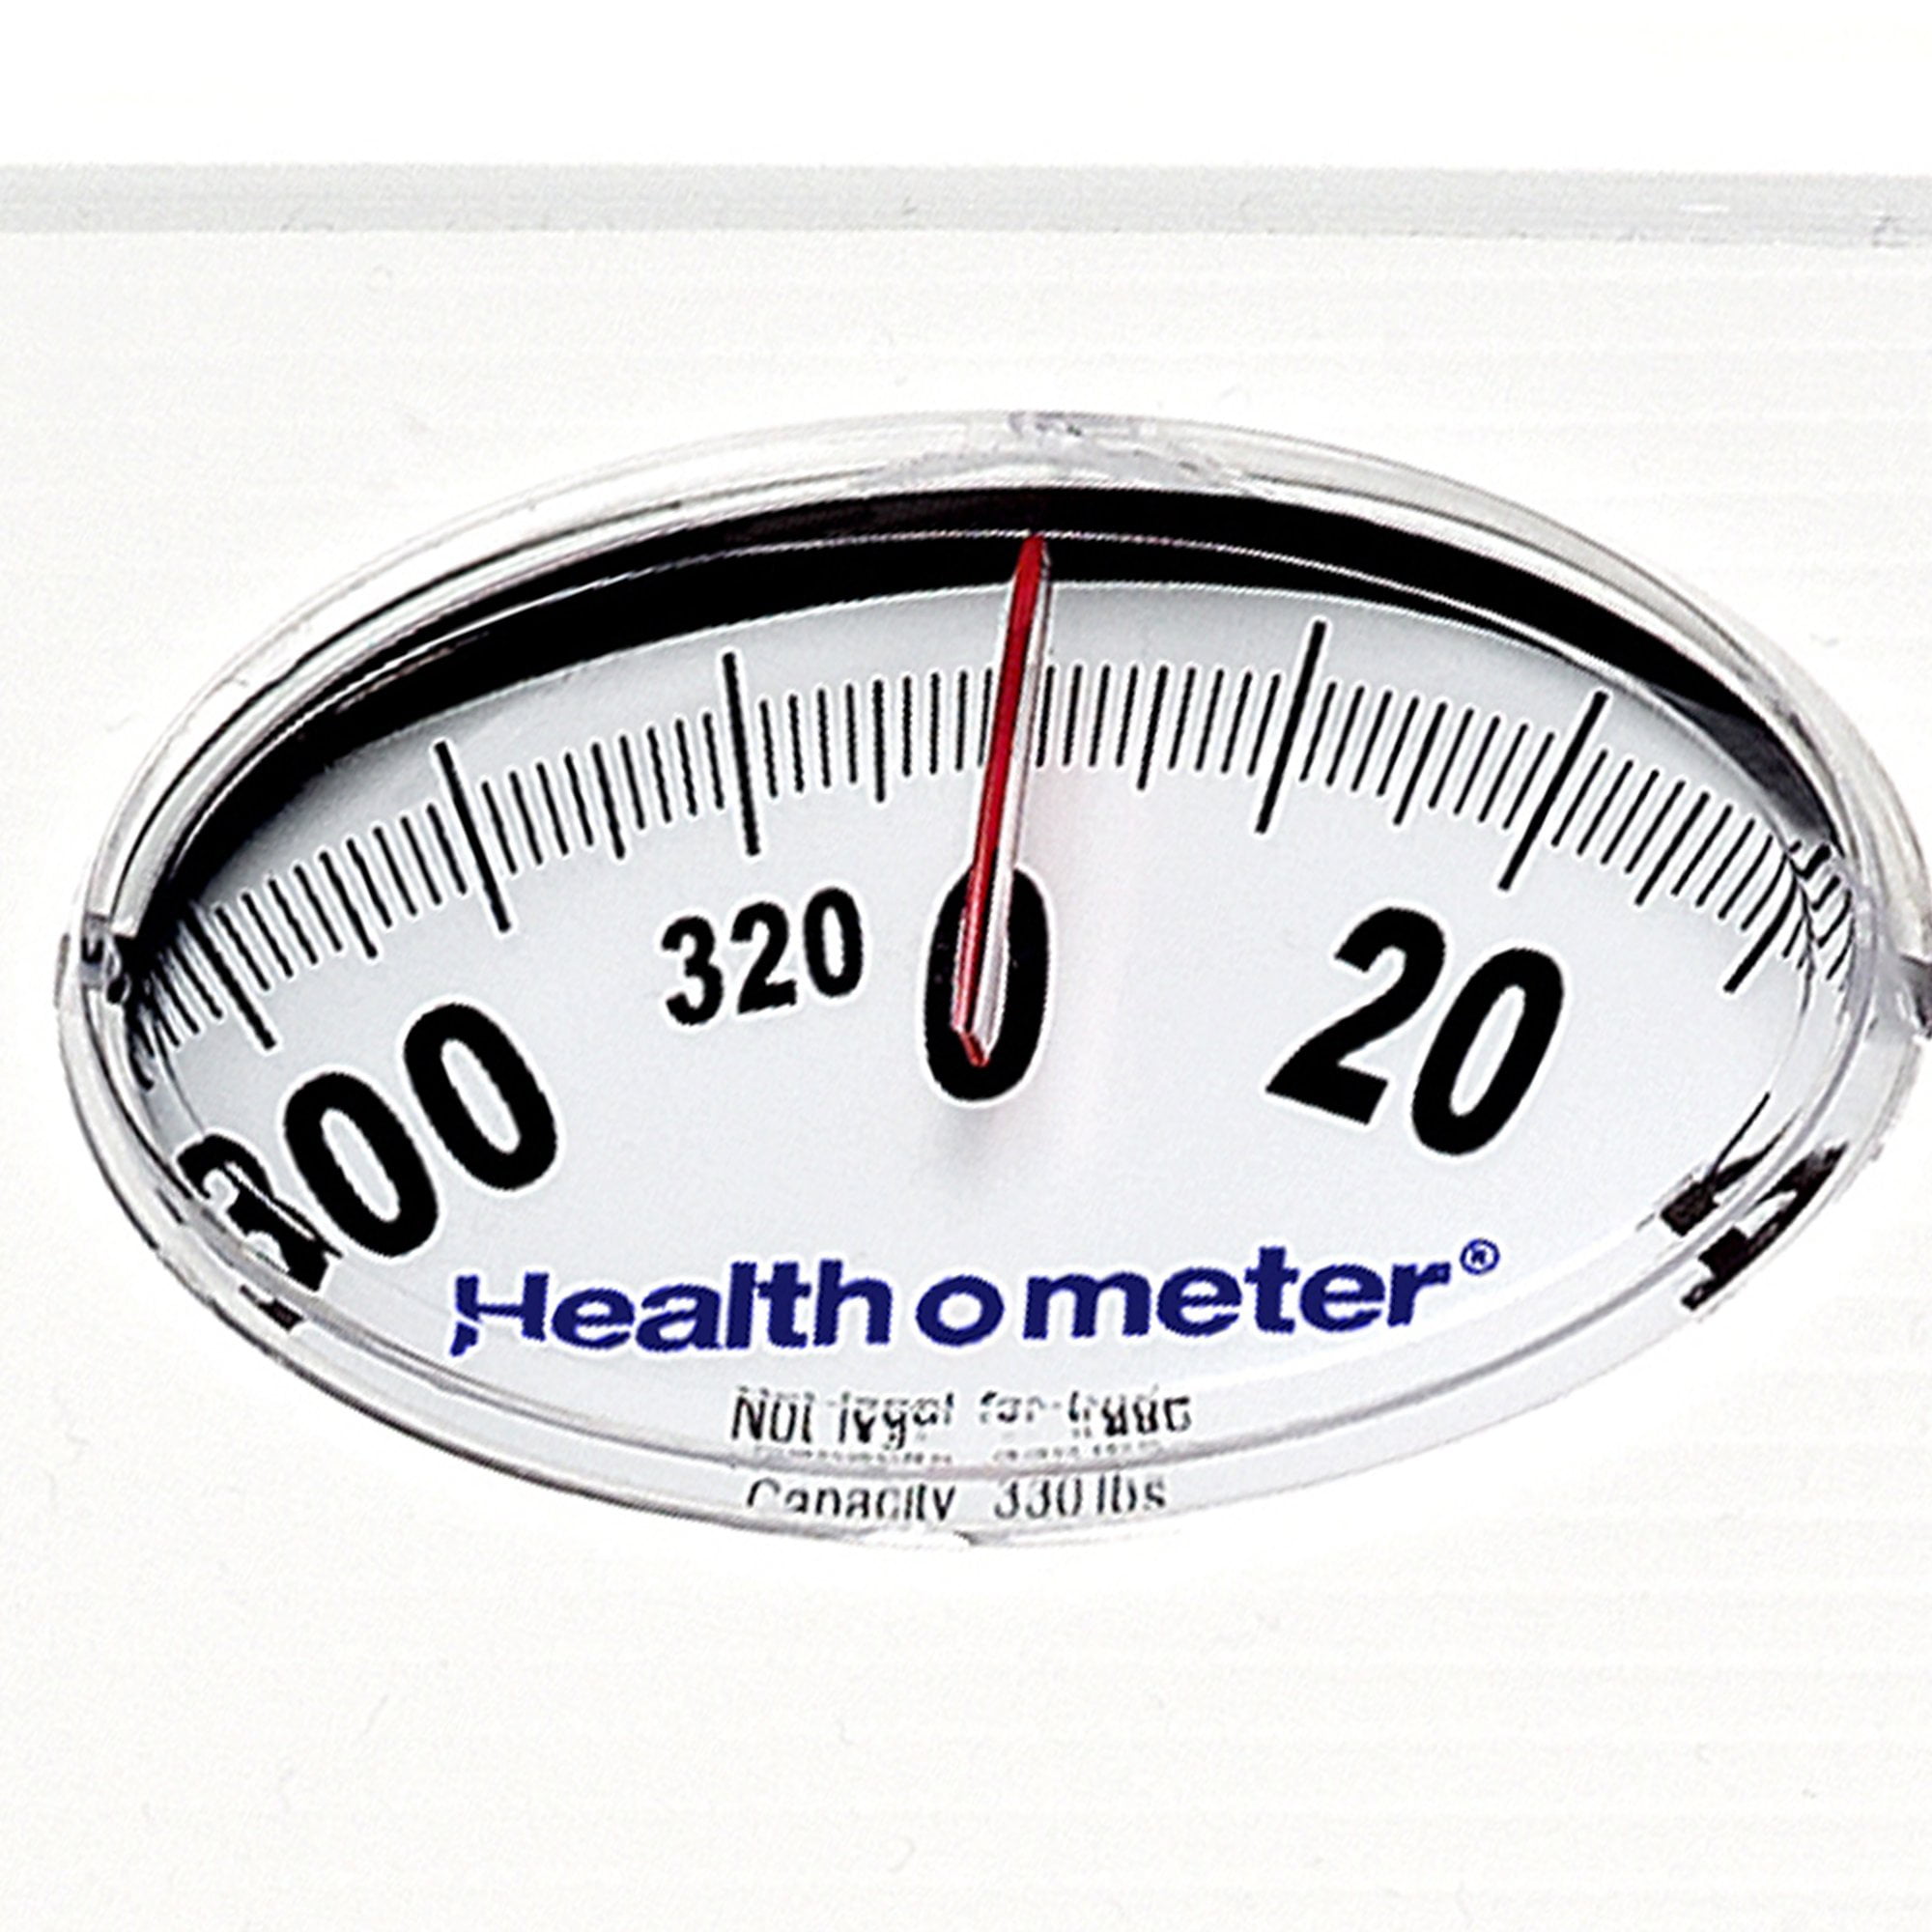 Health-o-Meter Full View Analog Dial Display Bathroom Scale Accurate to 330  lbs.